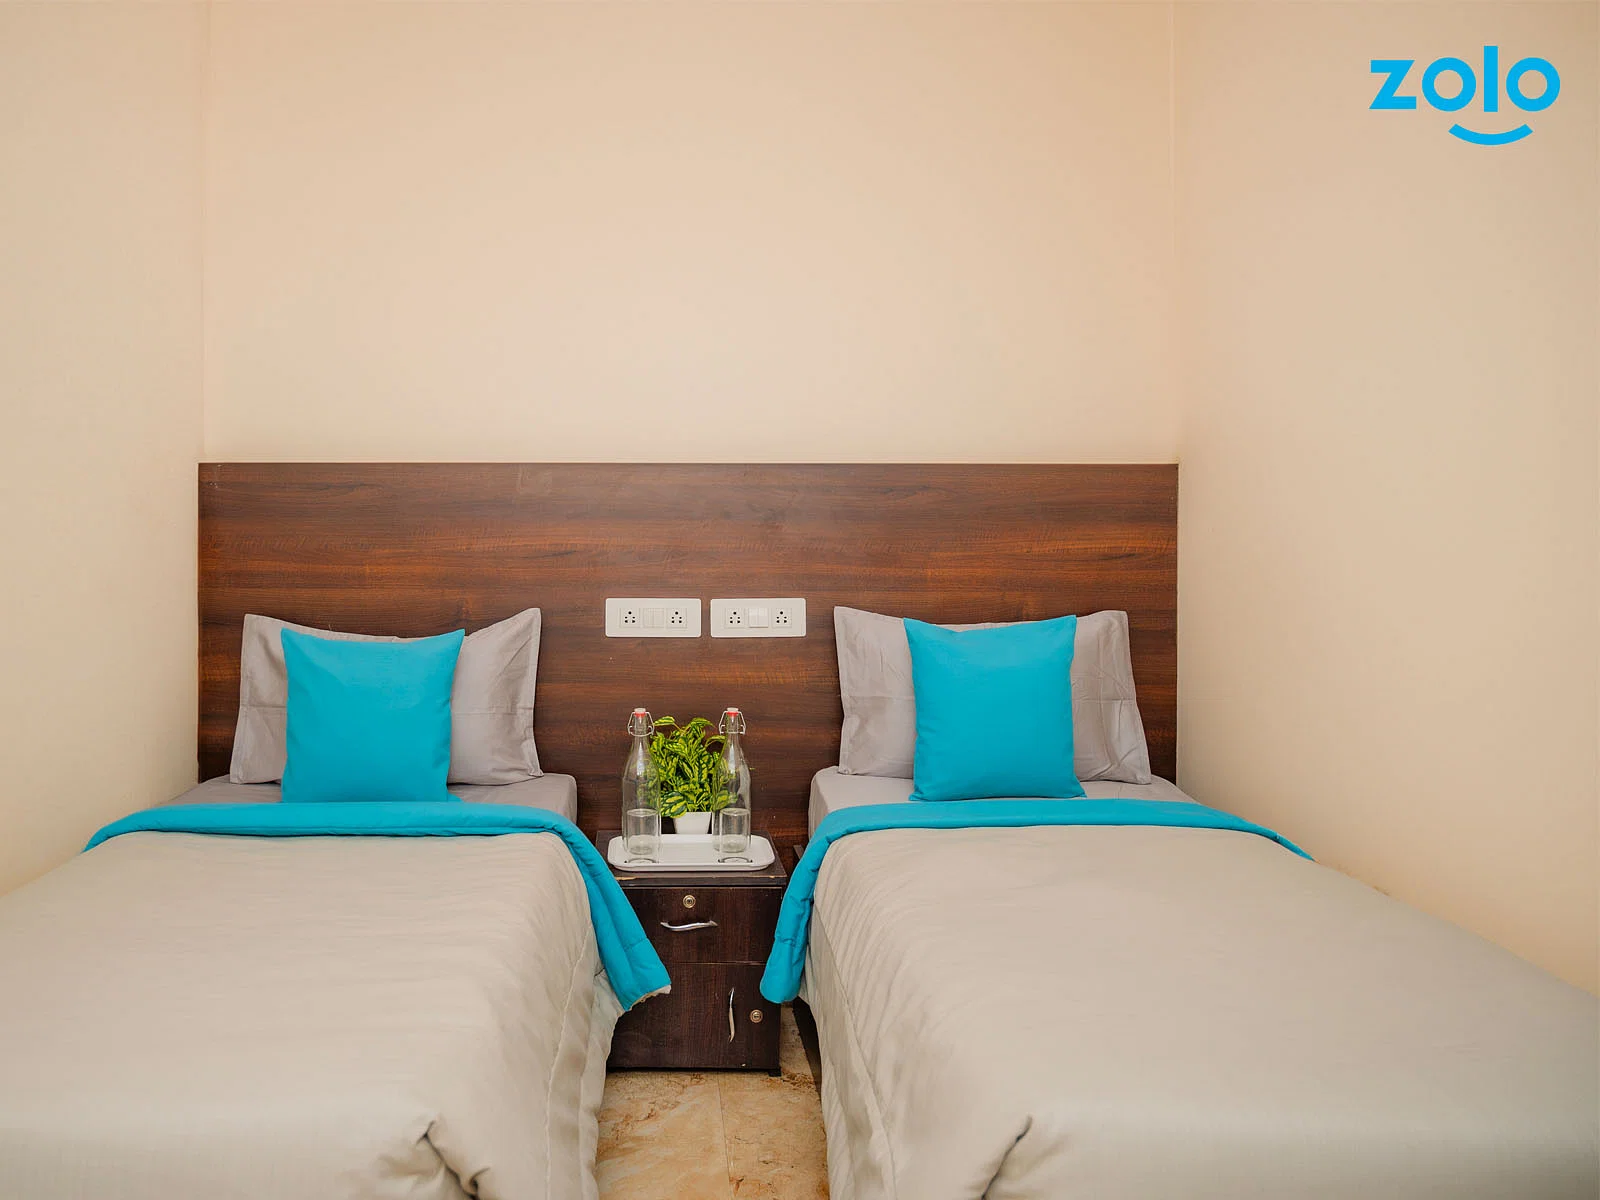 safe and affordable hostels for couple students with 24/7 security and CCTV surveillance-Zolo Lance